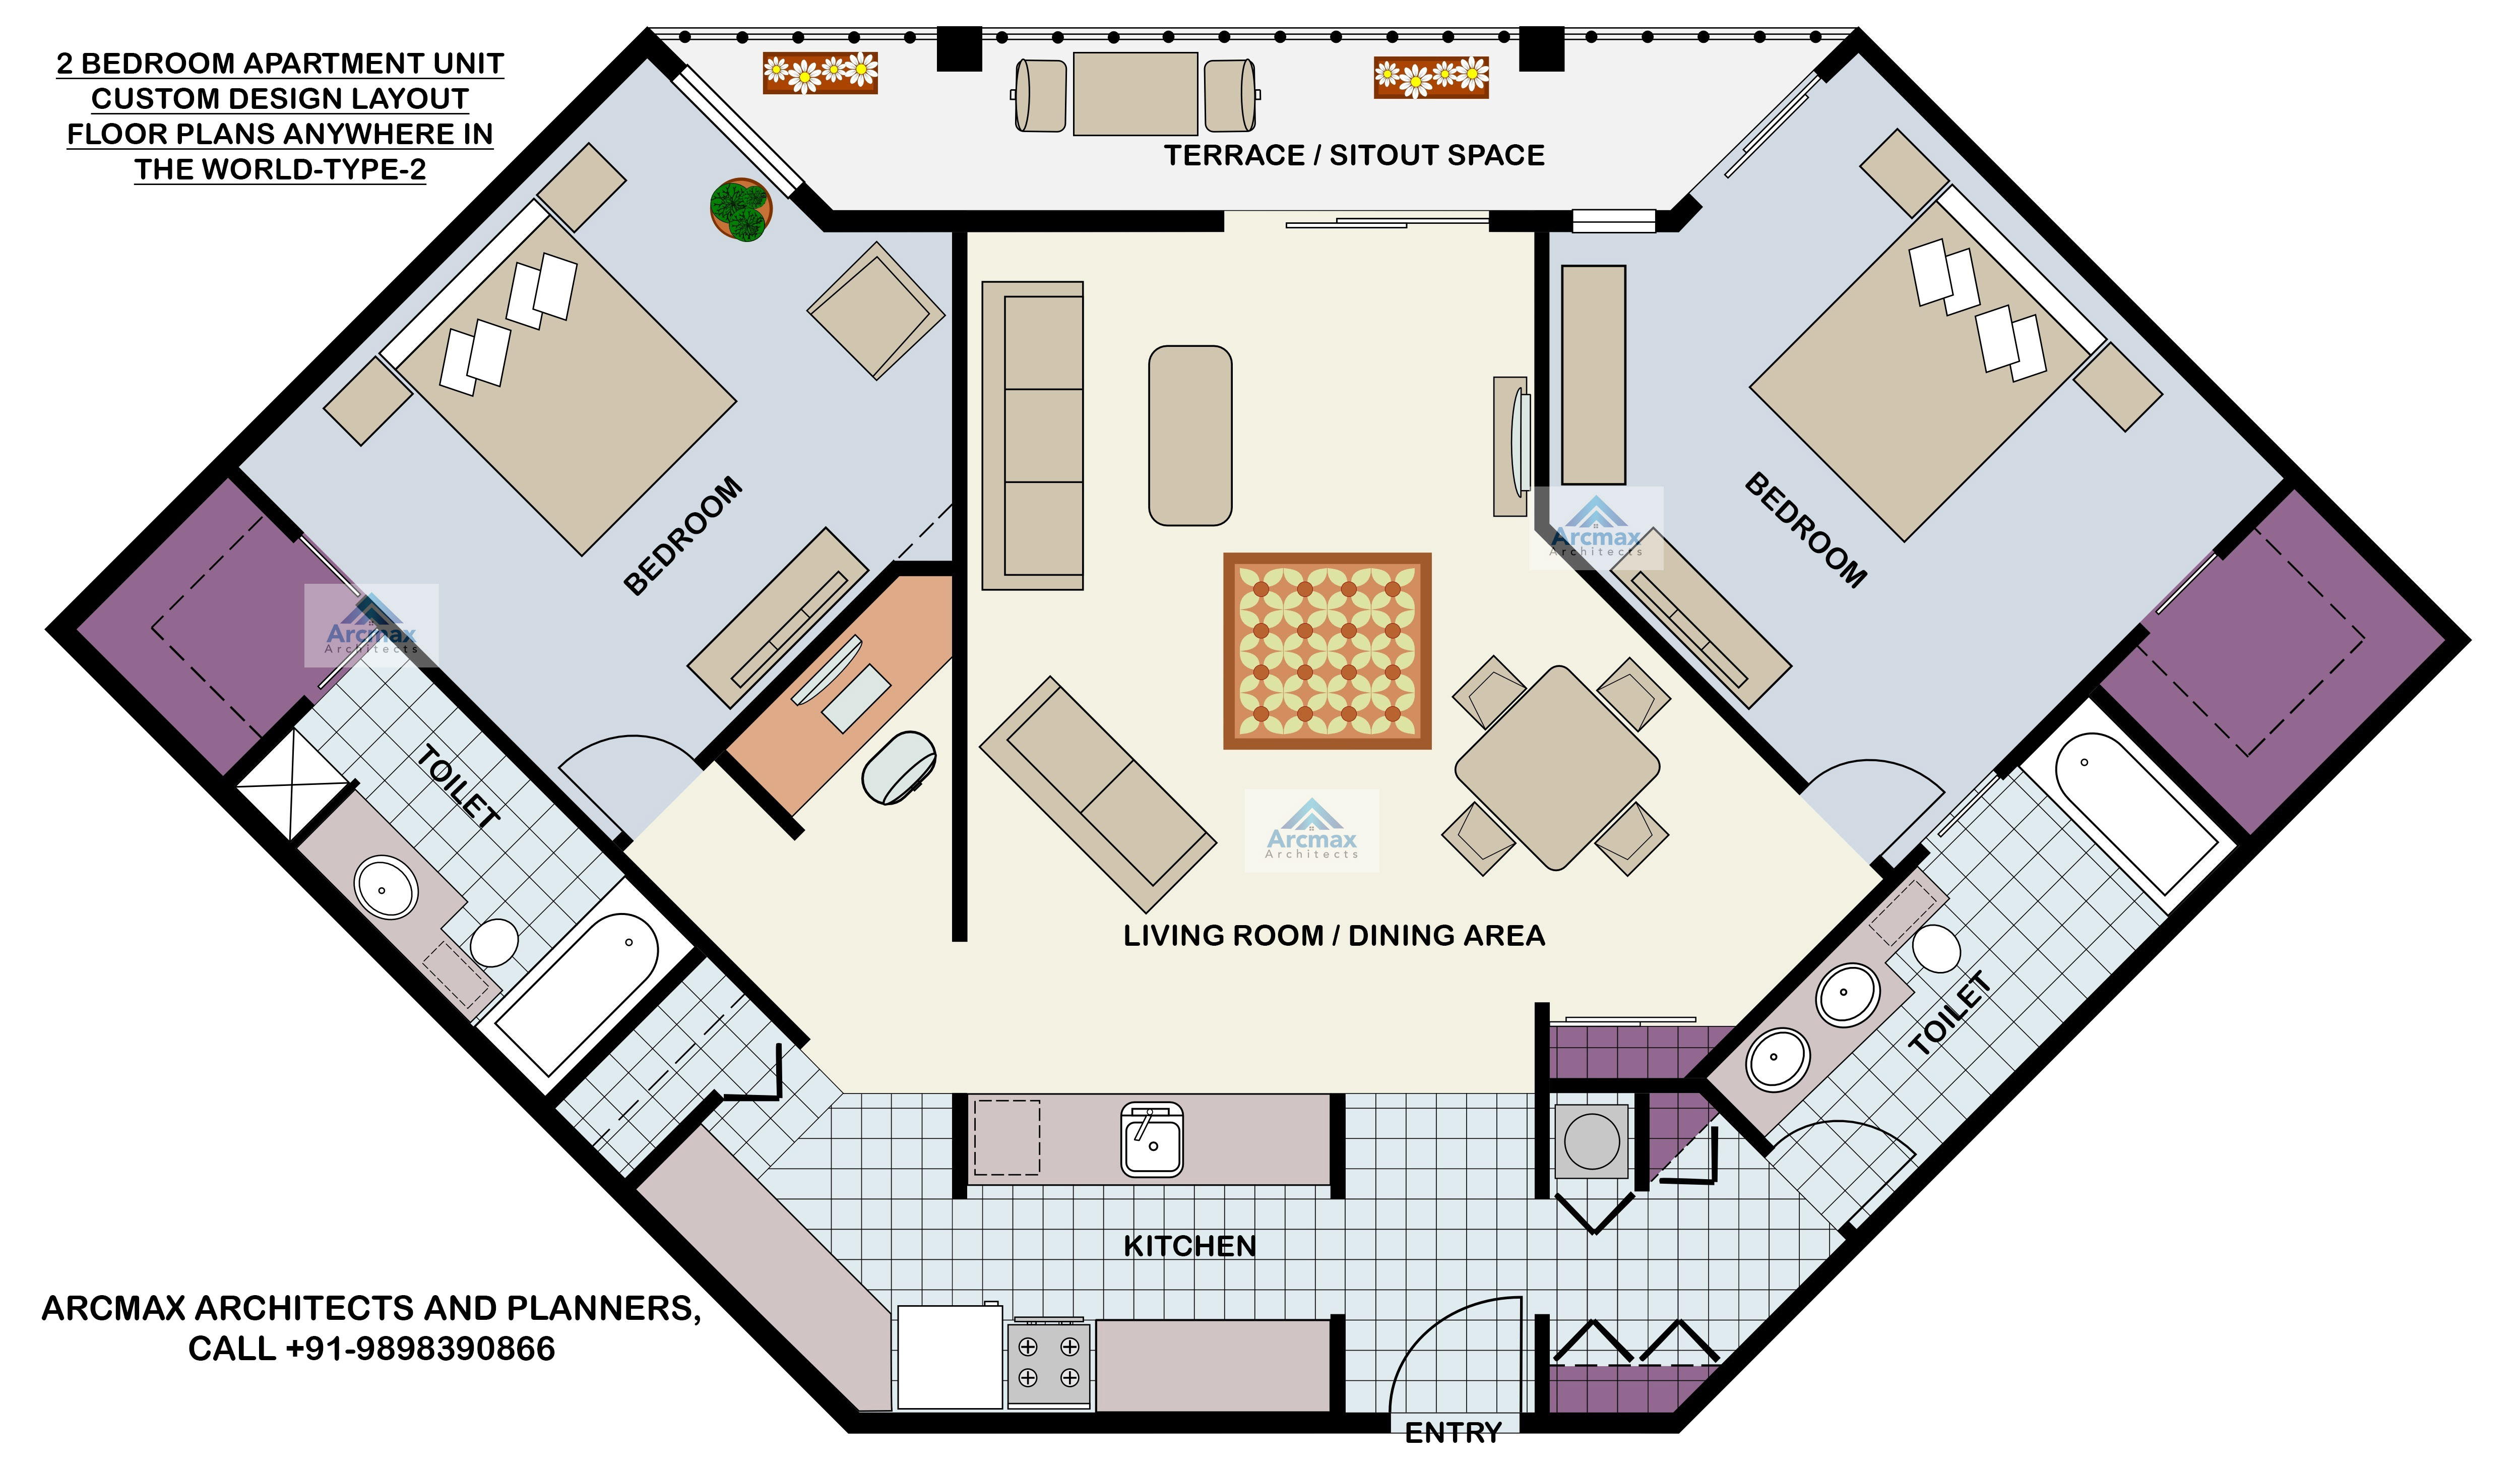 2 Bedroom Apartment Unit Custom Design Layout Floor Plans Anywhere In The World Type 2 